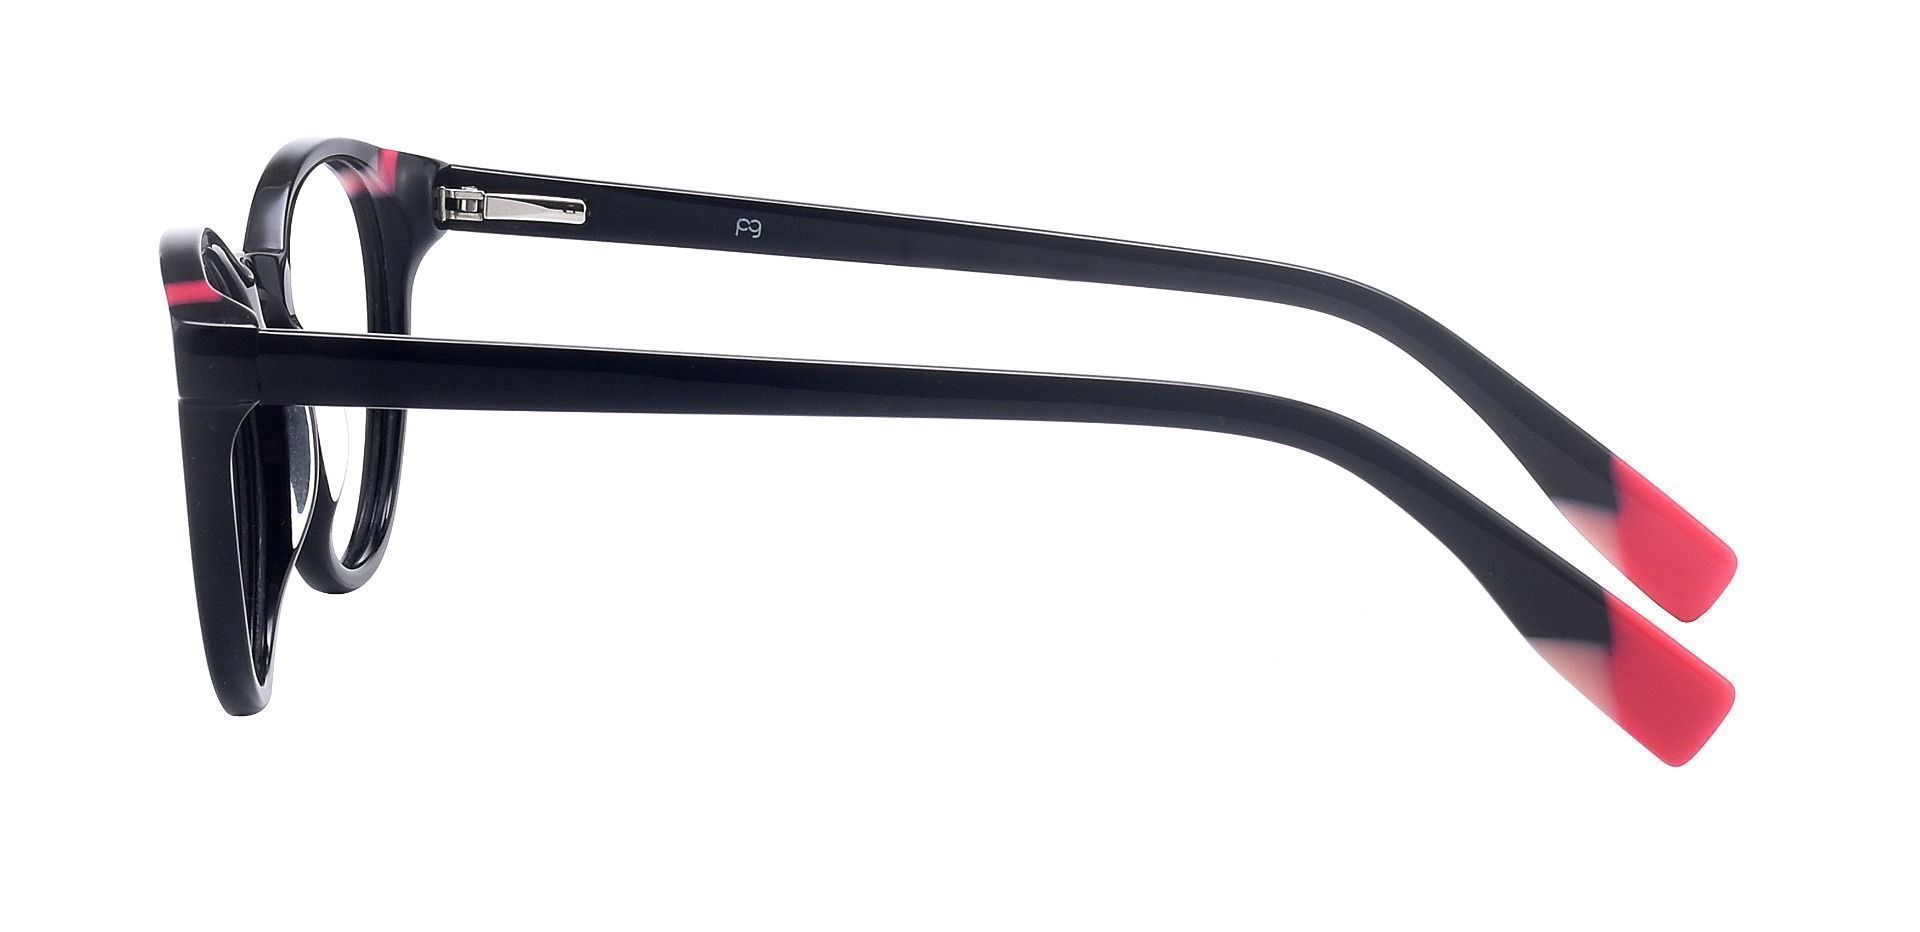 Odette Oval Reading Glasses - The Frame Is Black And Red